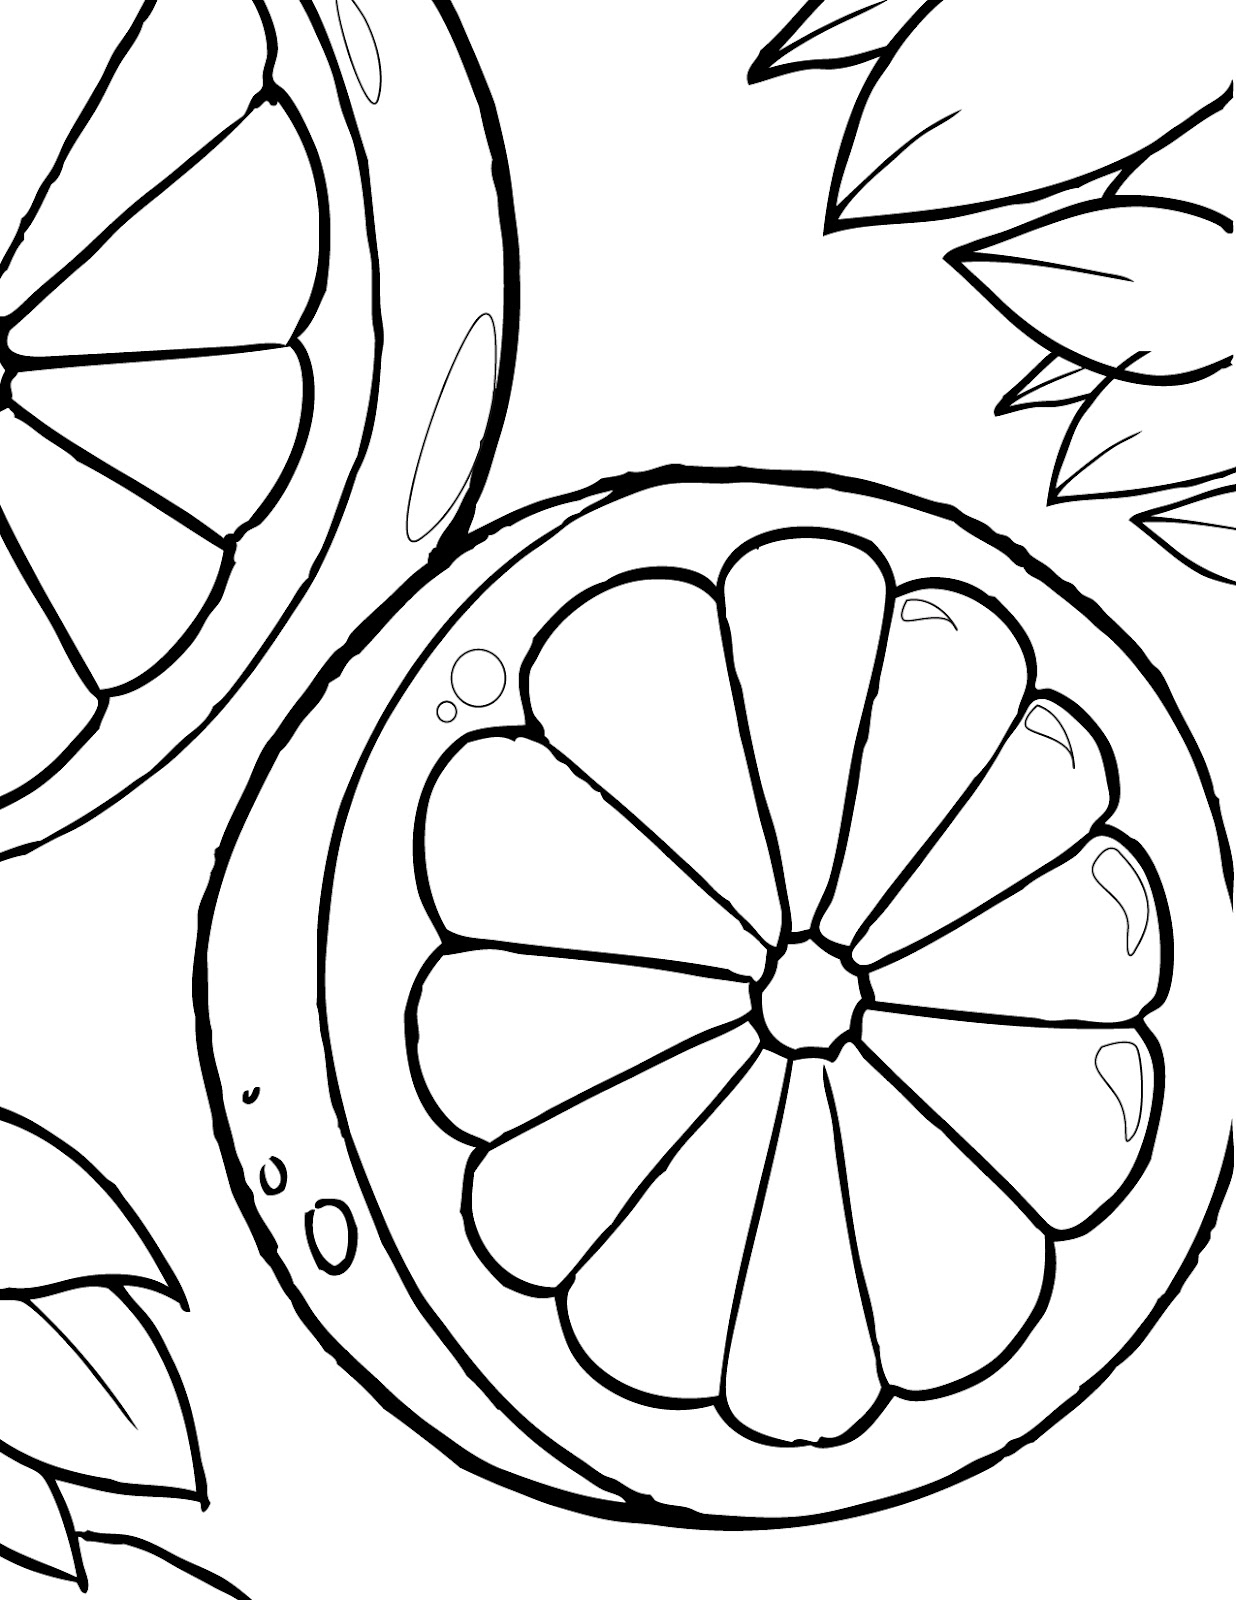 Free Coloring Book Image 7